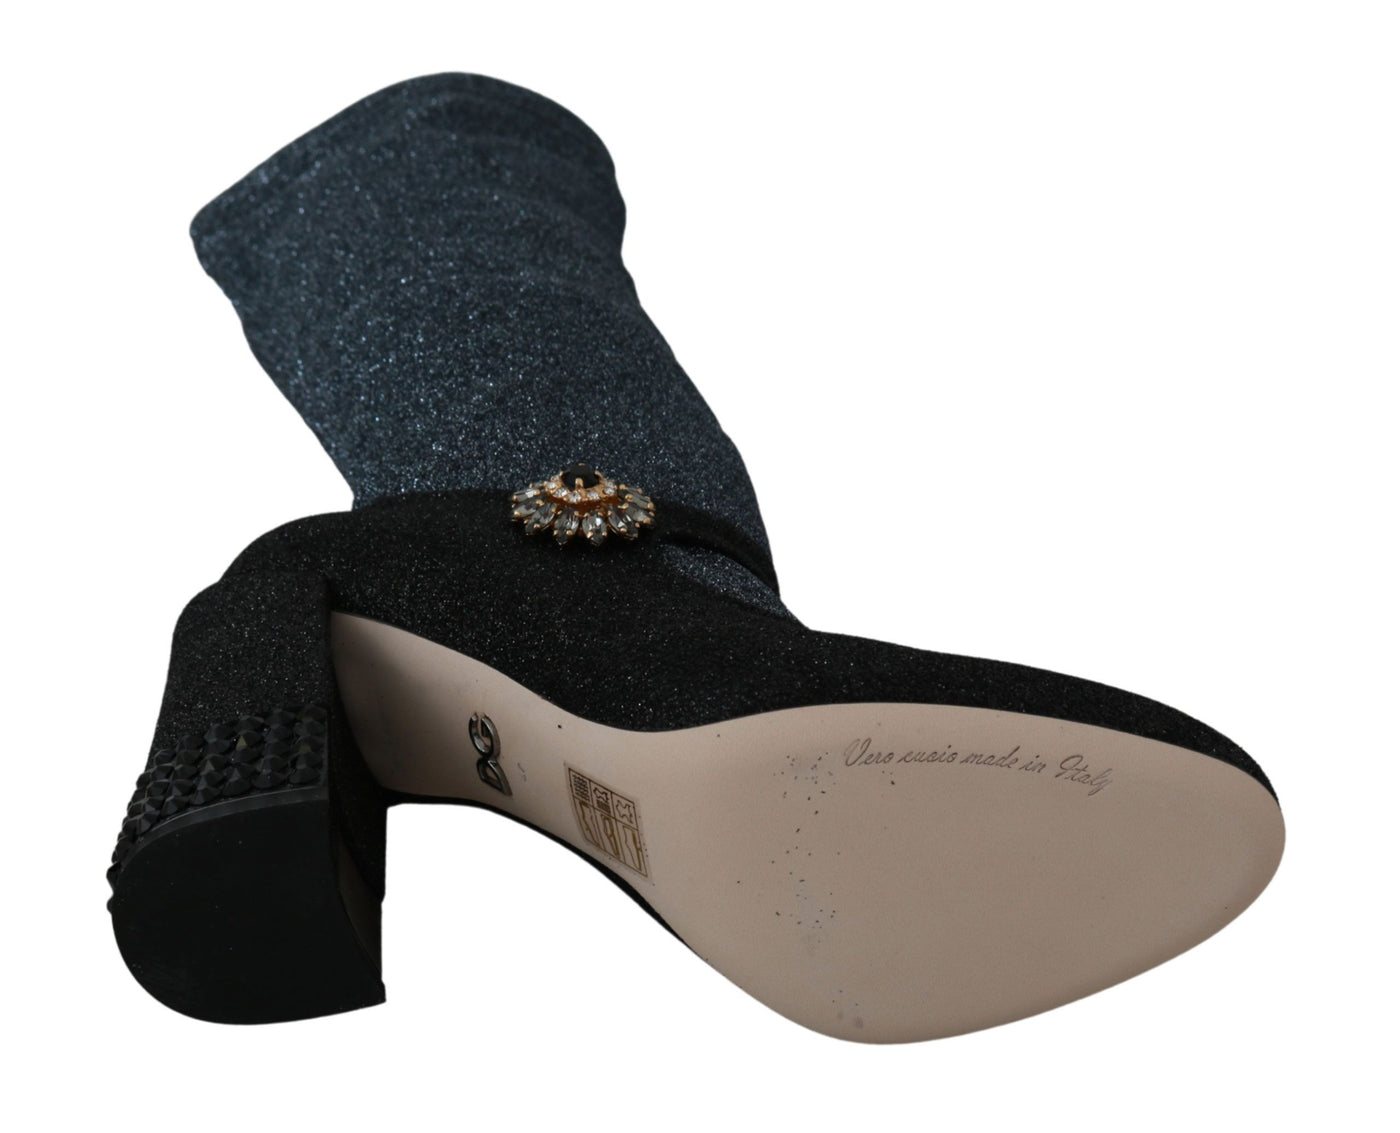 Dolce & Gabbana Black Crystal Mary Janes Booties Shoes